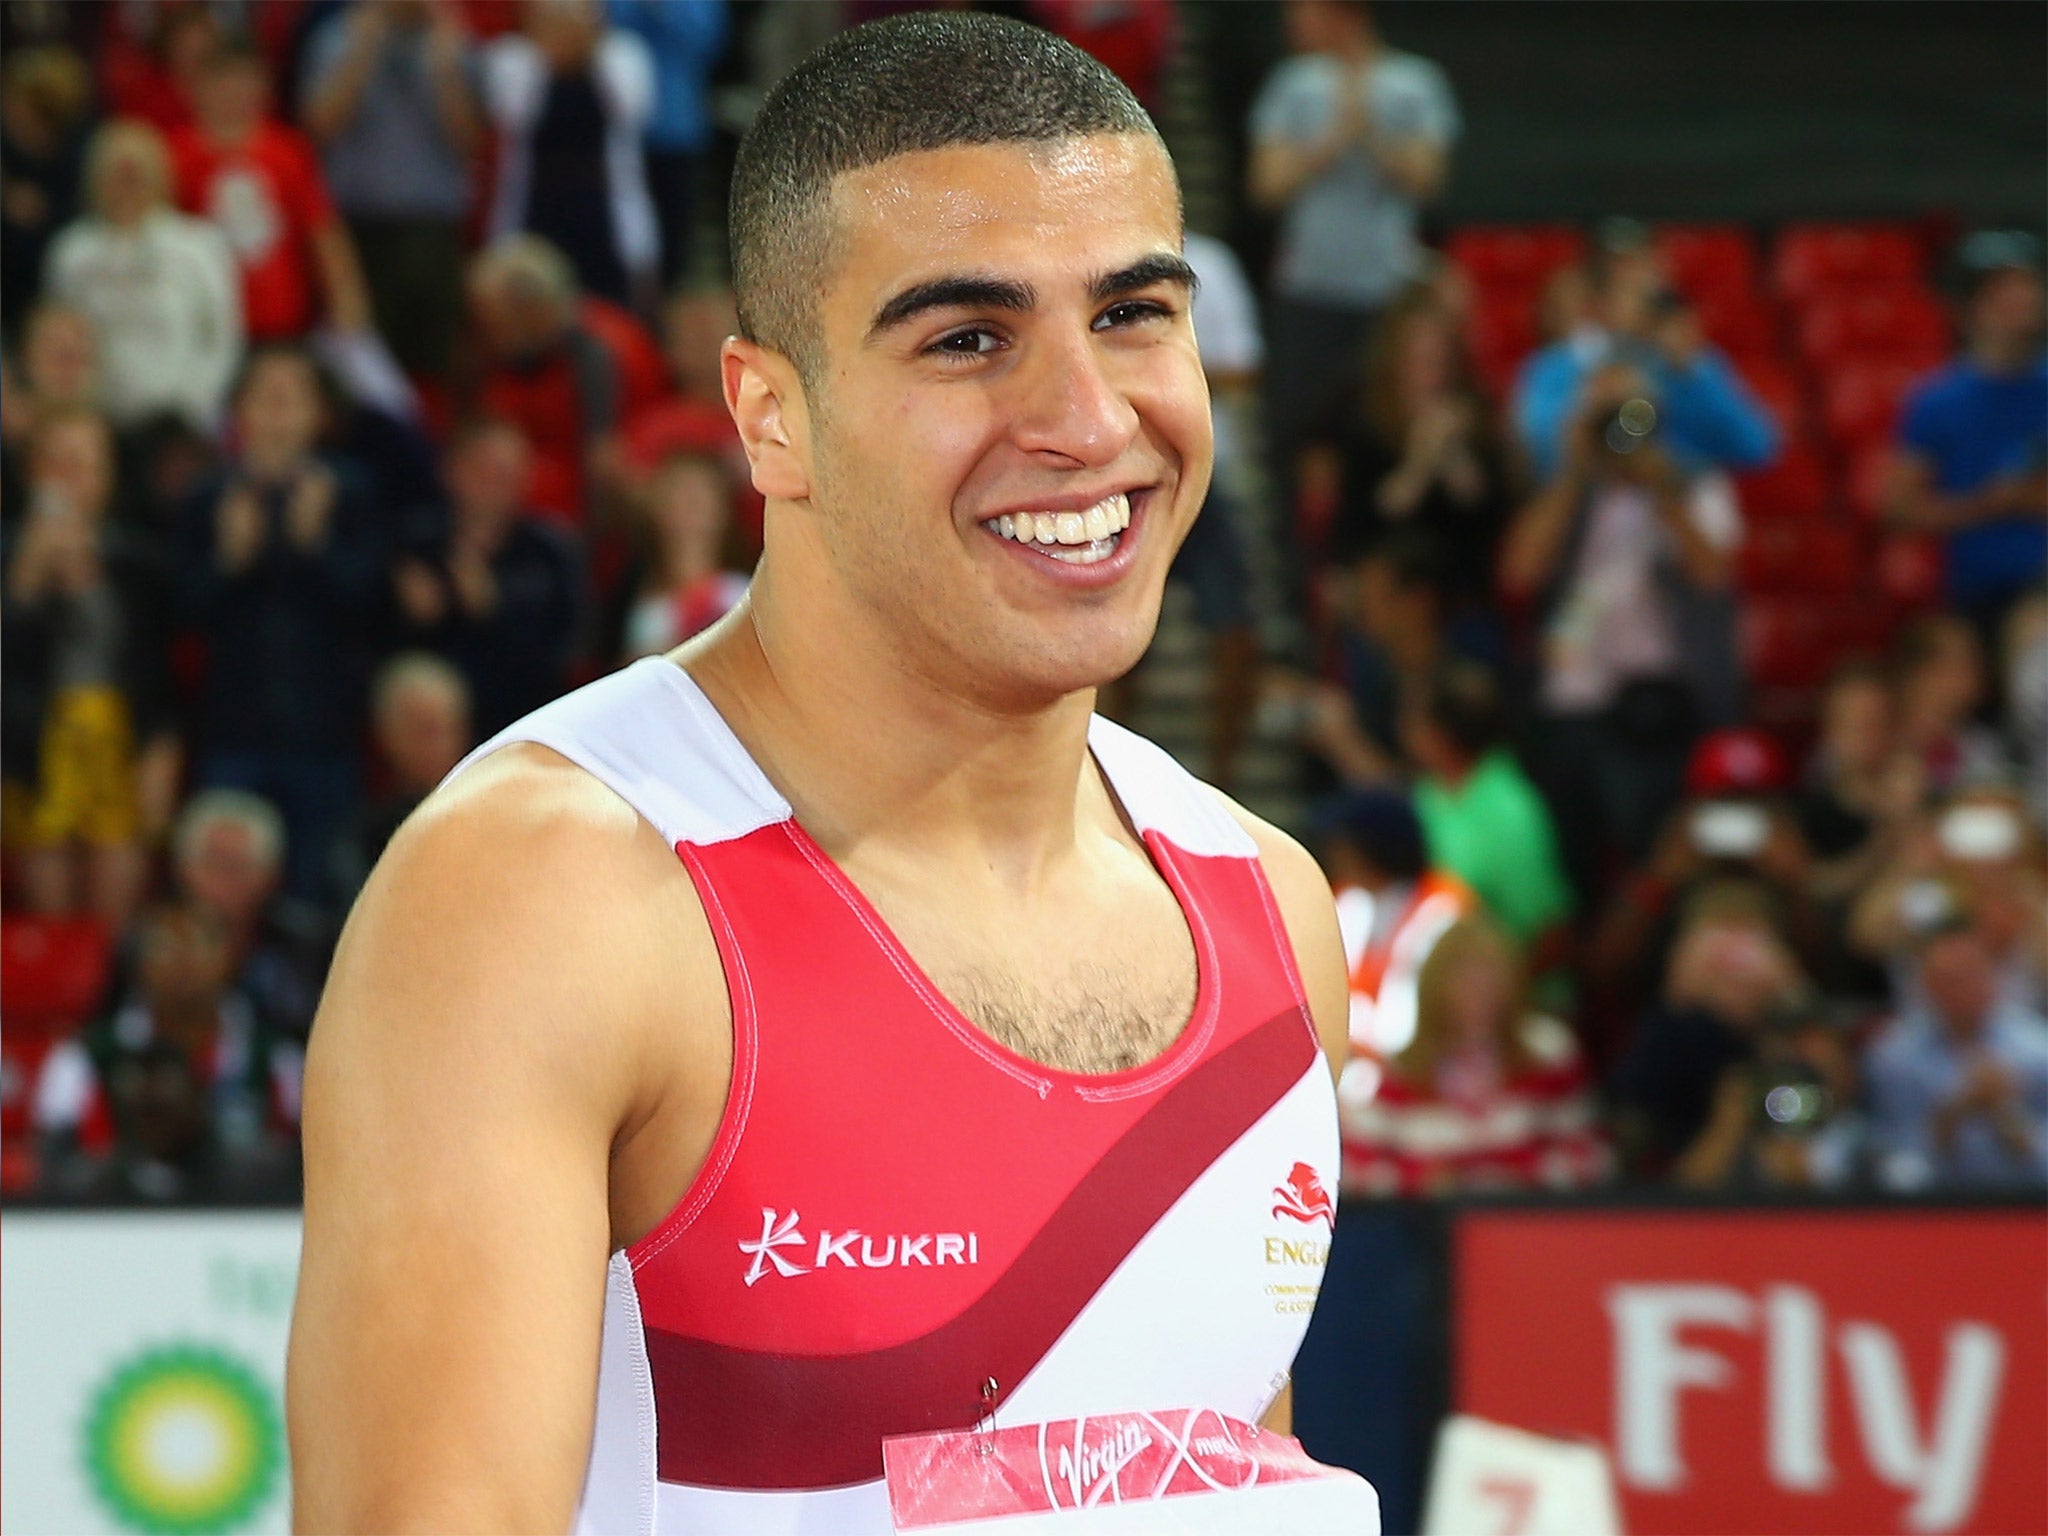 Adam Gemili is all smiles after his time of 10.10sec was good enough to secure silver in the 100m final